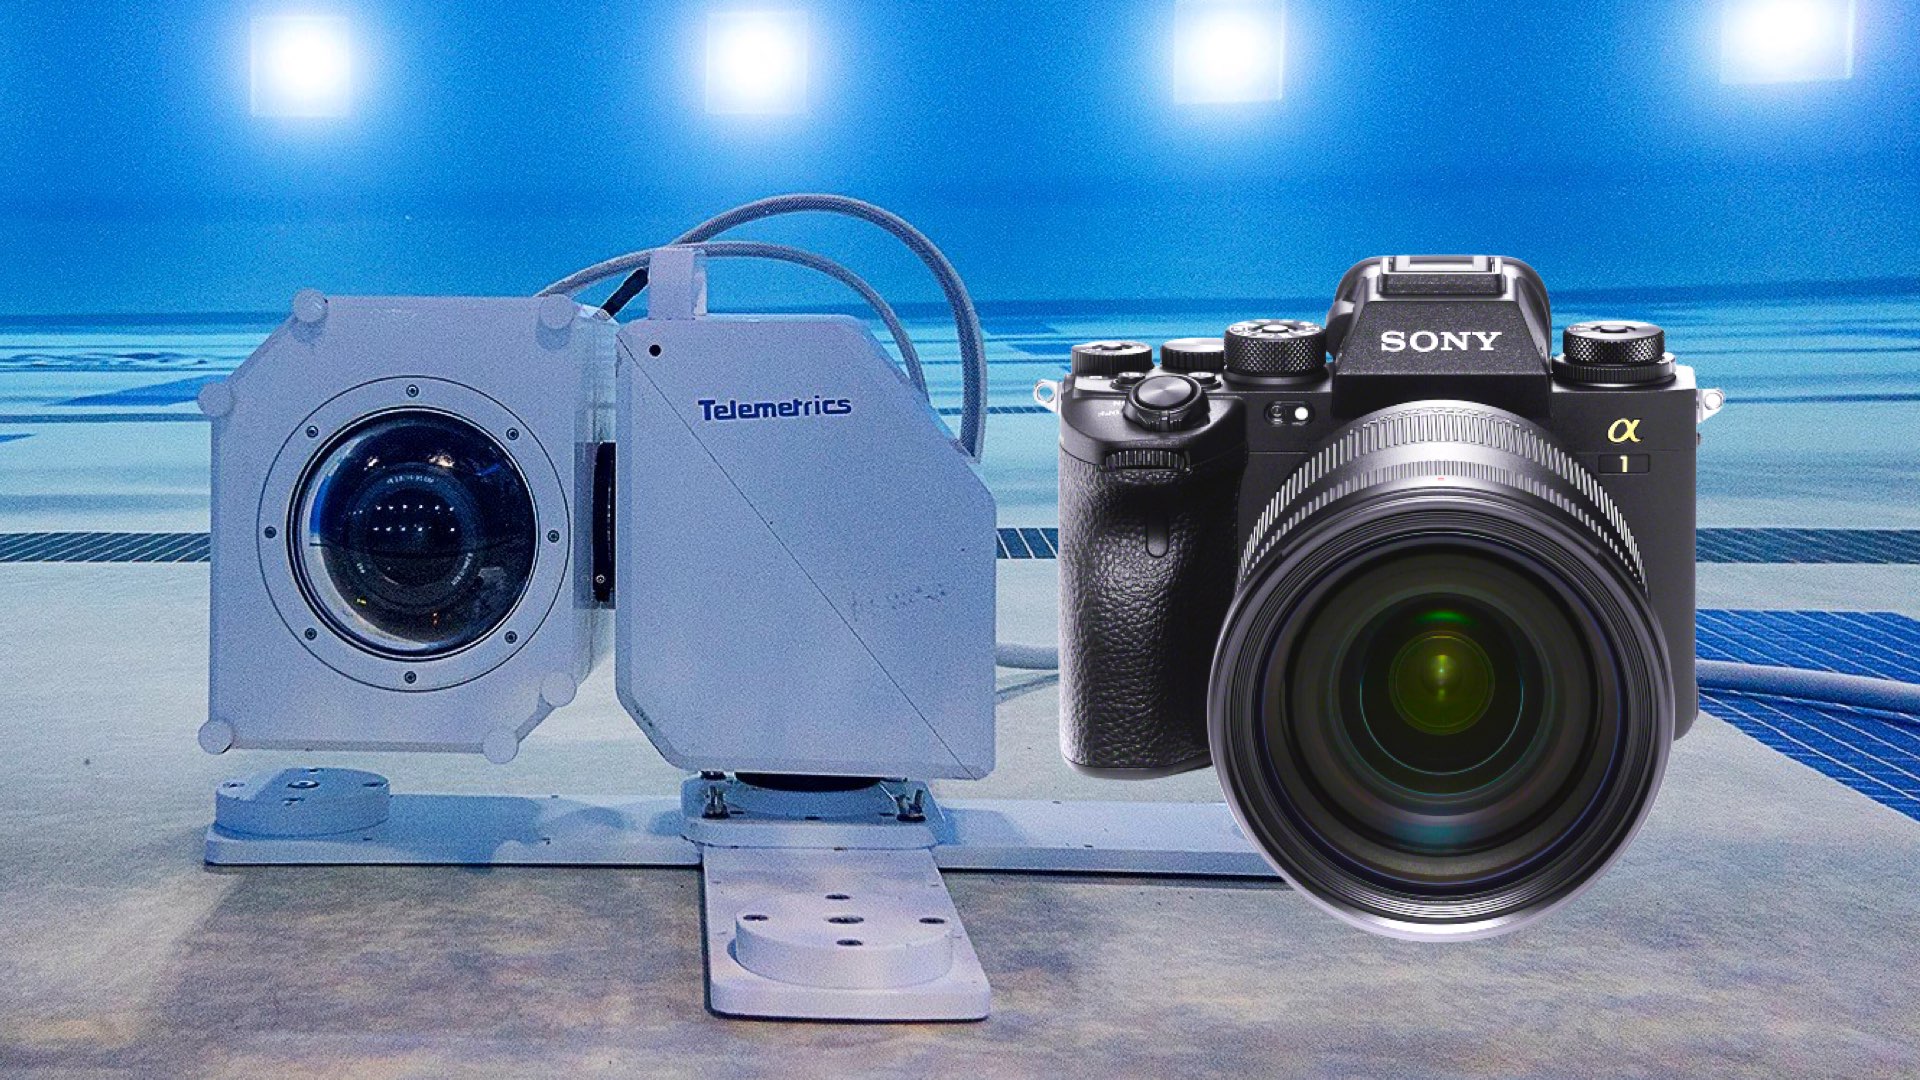 Sony Alpha Cameras Conquer Tokyo Olympics' Underwater Imagery